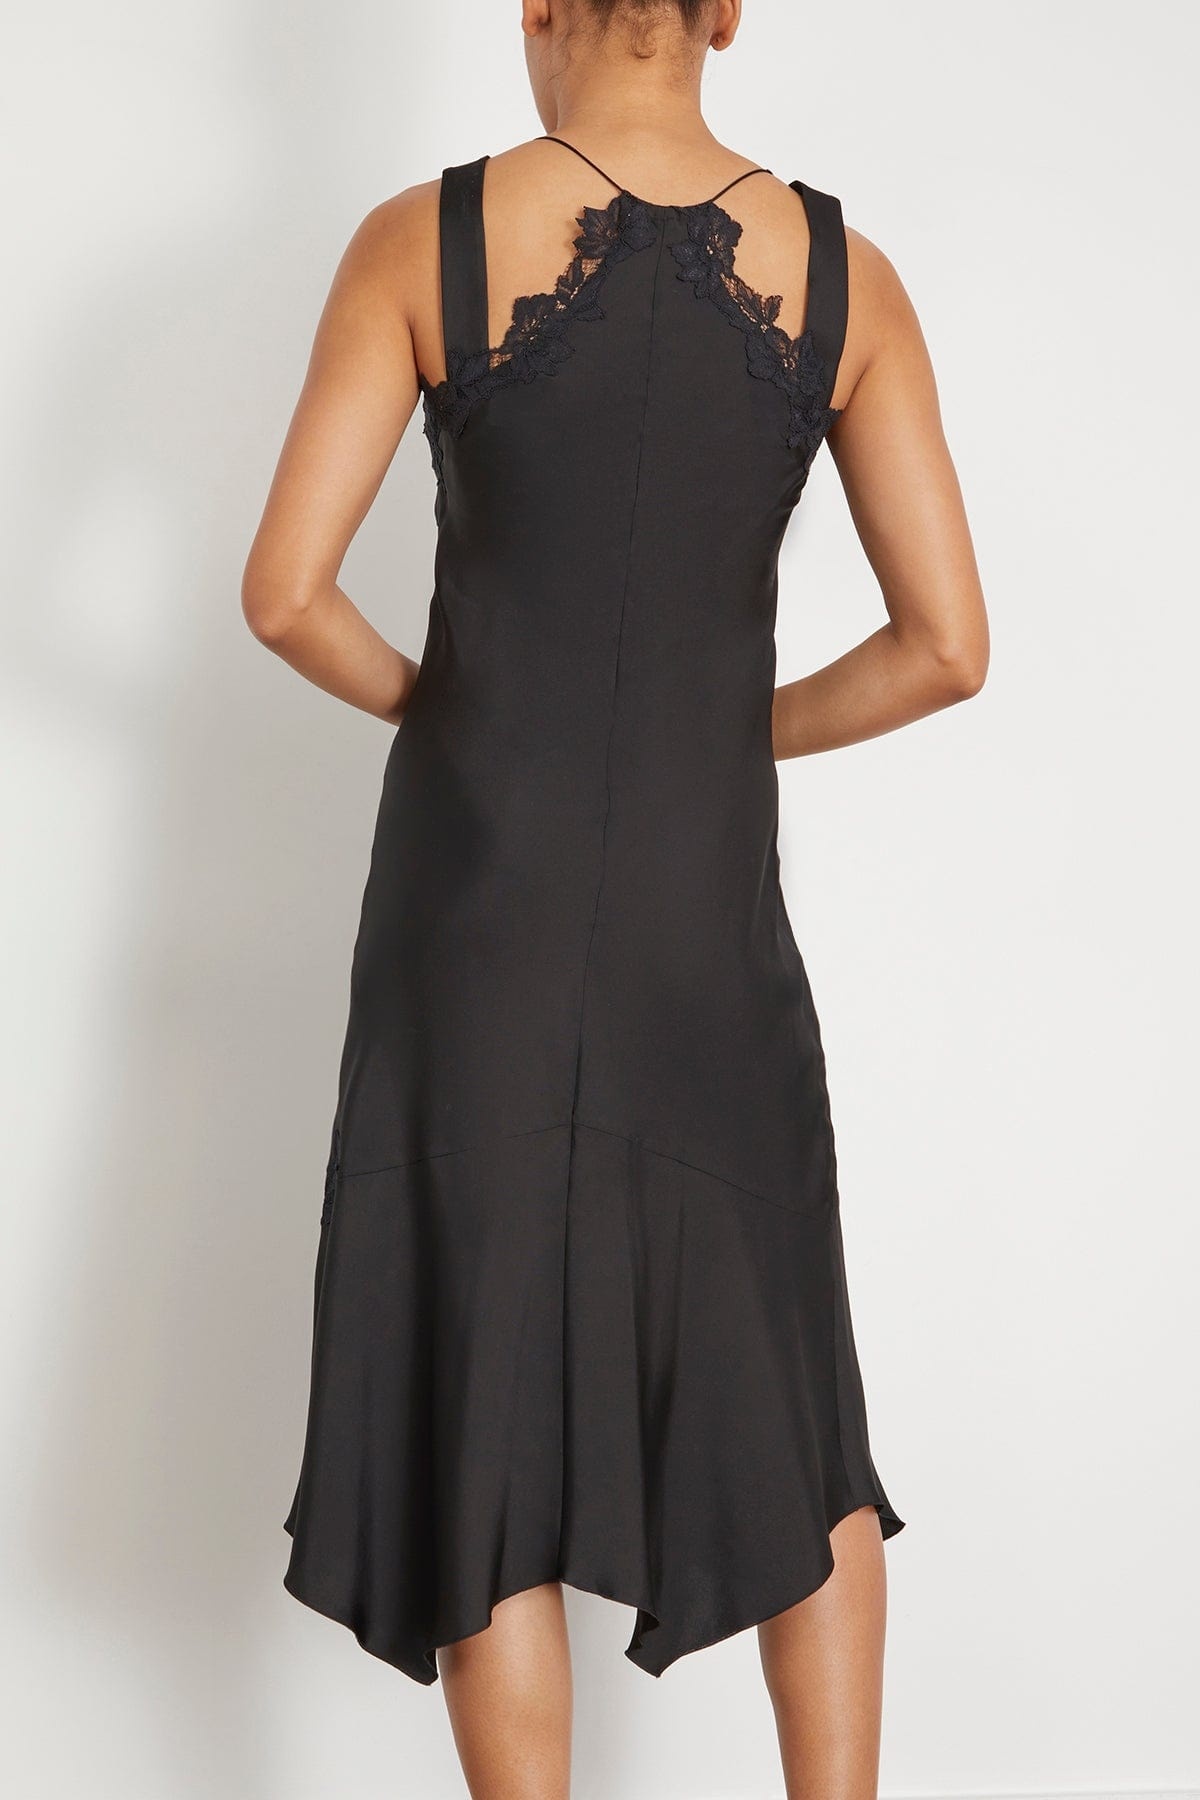 Sensual Coolness Dress in Pure Black - 4